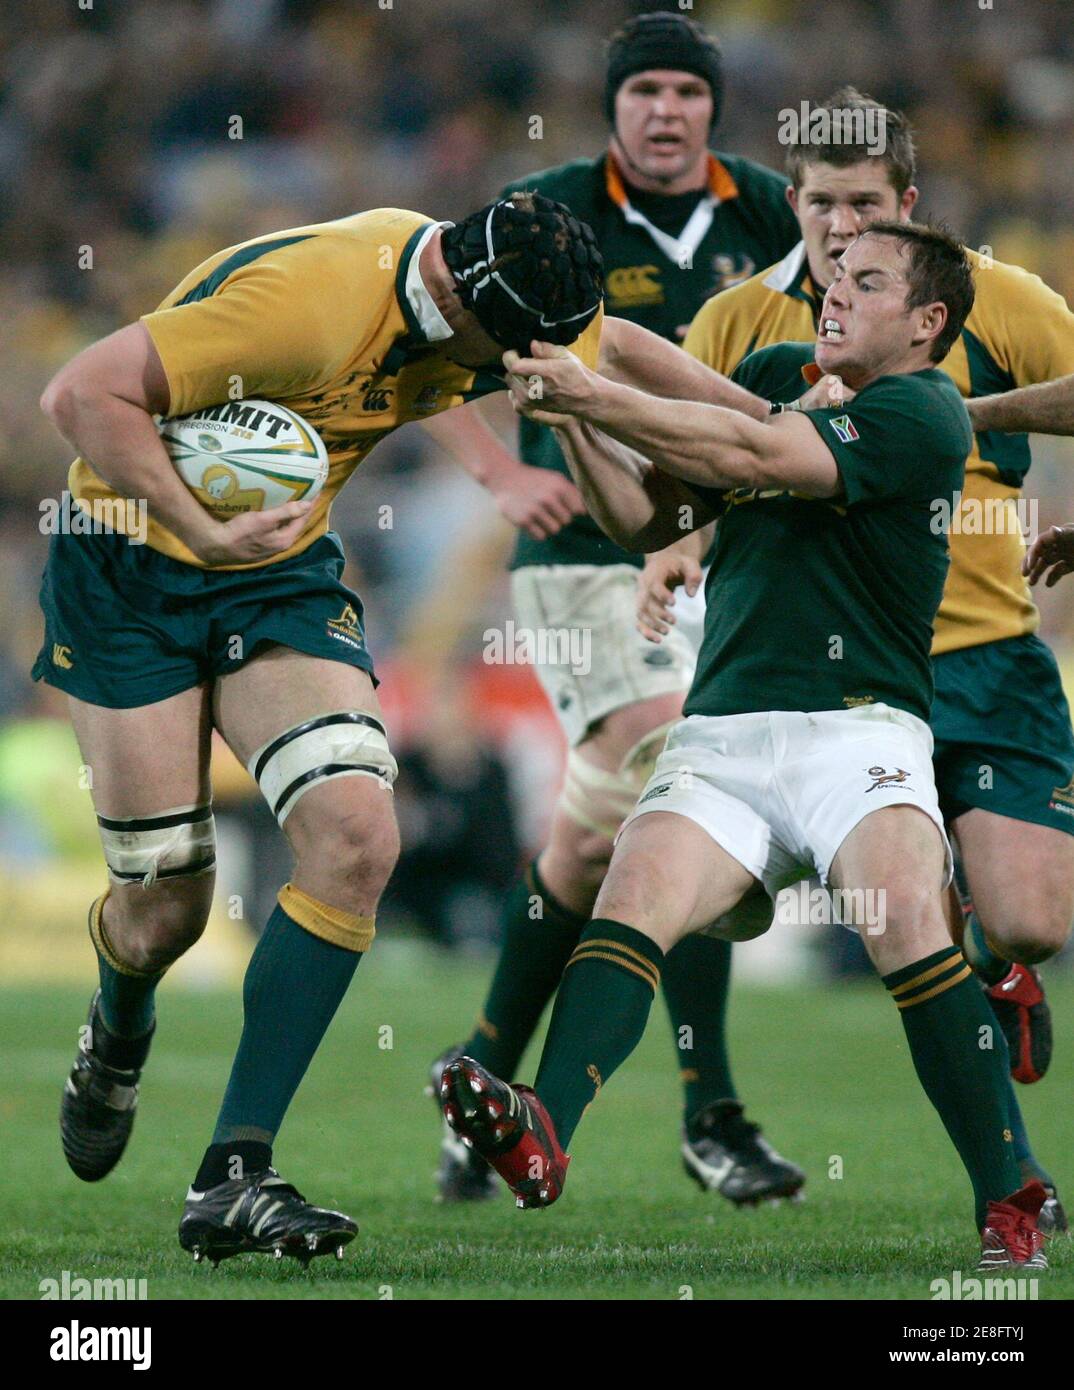 South Africa's Butch James (R) tackles Australia's Daniel Vickerman (L) by the head gear during their Tri-Nations rugby union Test match in Sydney August 5, 2006.  REUTERS/Will Burgess   (AUSTRALIA) Stock Photo